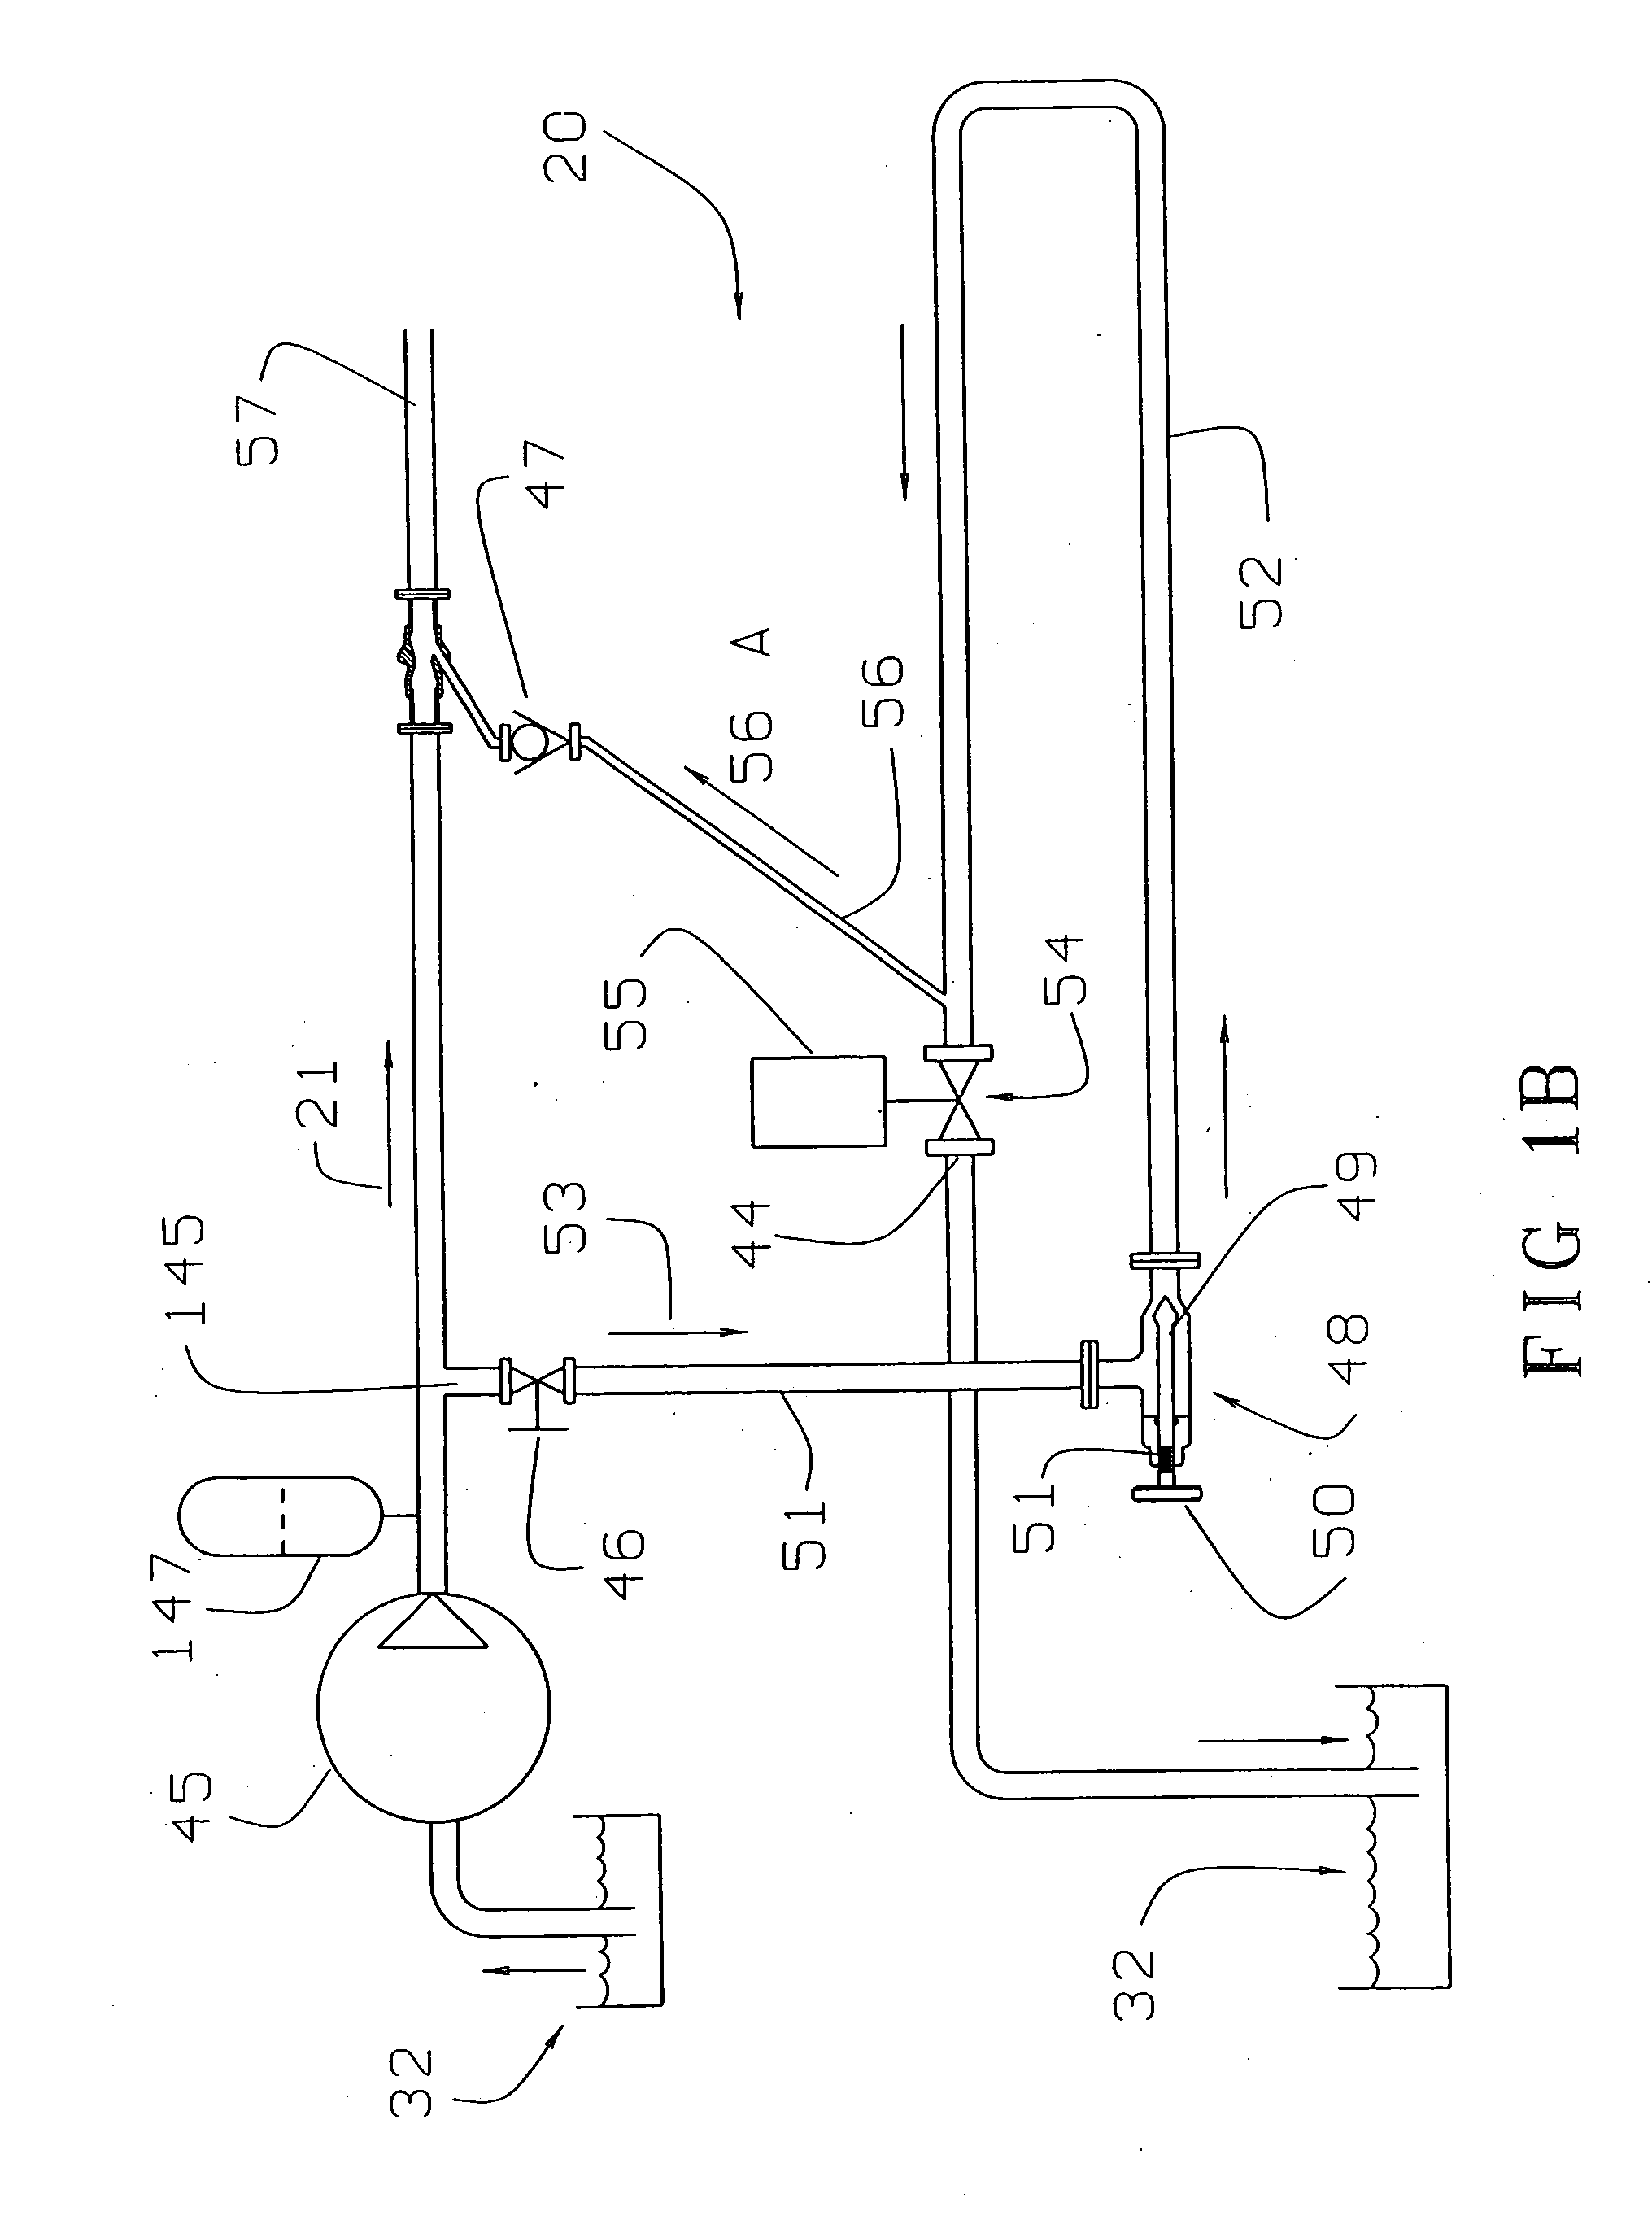 Acoustic flow pulsing apparatus and method for drill string